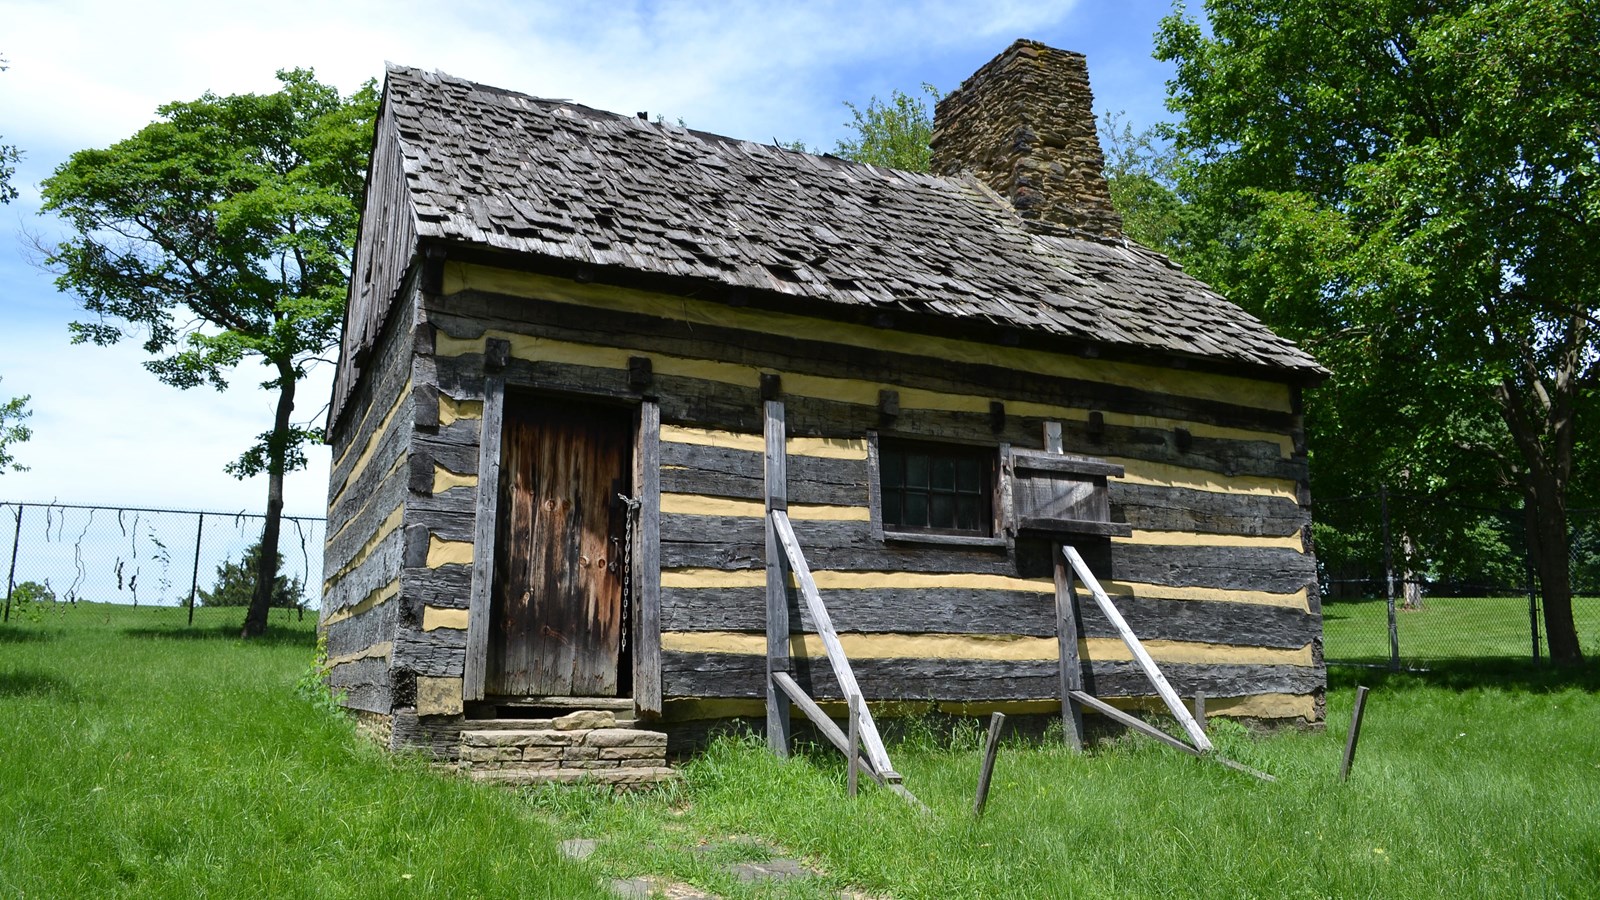 An 18th century log cabin in a grassy field with a fence behind it